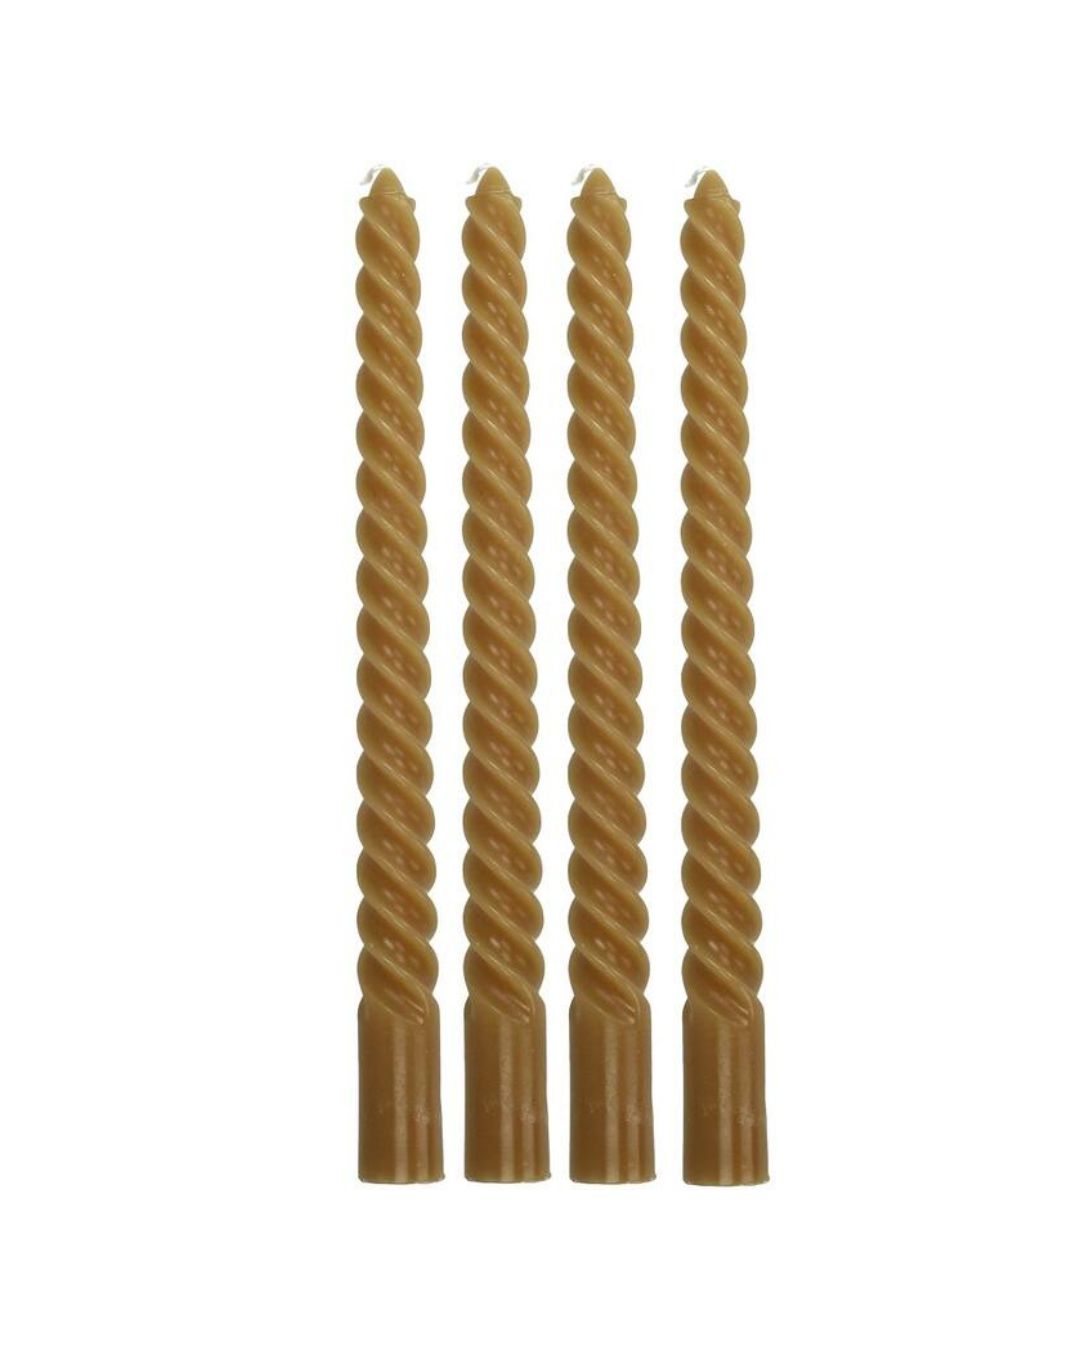 Twisted Candles - Ochre (Box of 4)